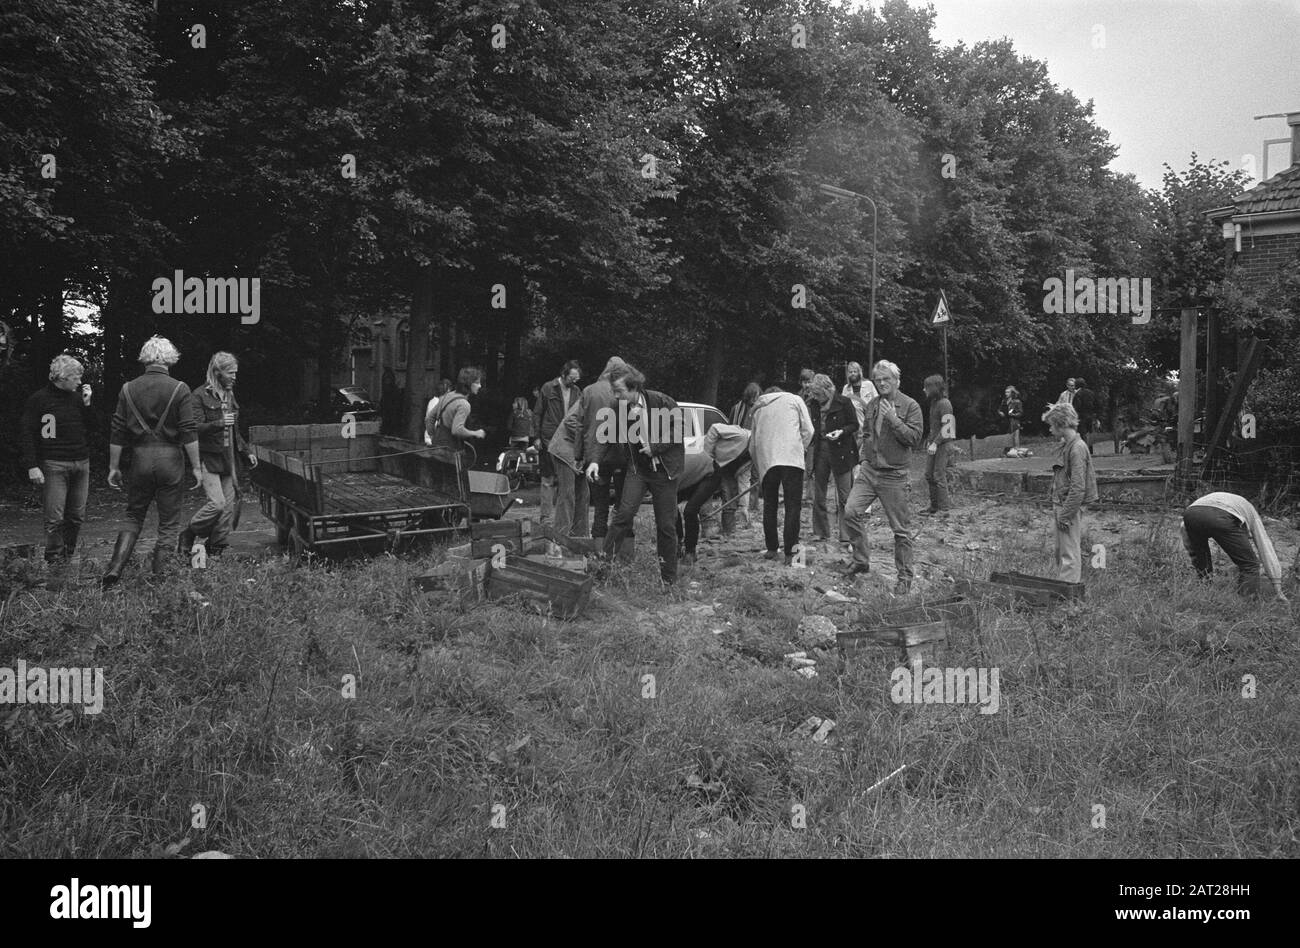 Bike tour for conservation of Ruigoord, the cyclists Date: August 5, 1973 Location: Amsterdam, Noord-Holland, Ruigoord Keywords: protests Stock Photo